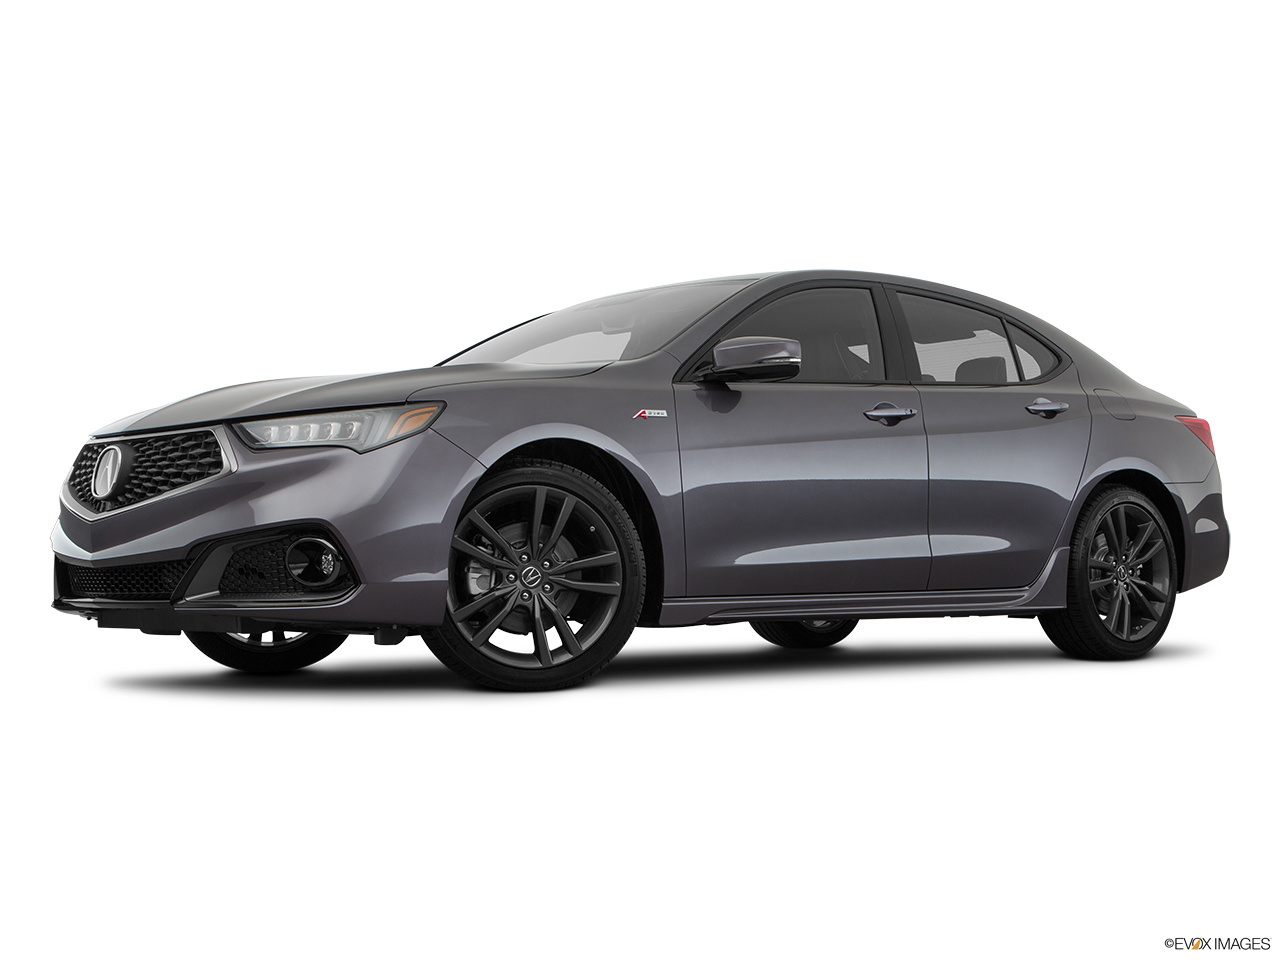 2019 Acura TLX 3.5L Low/wide front 5/8. 